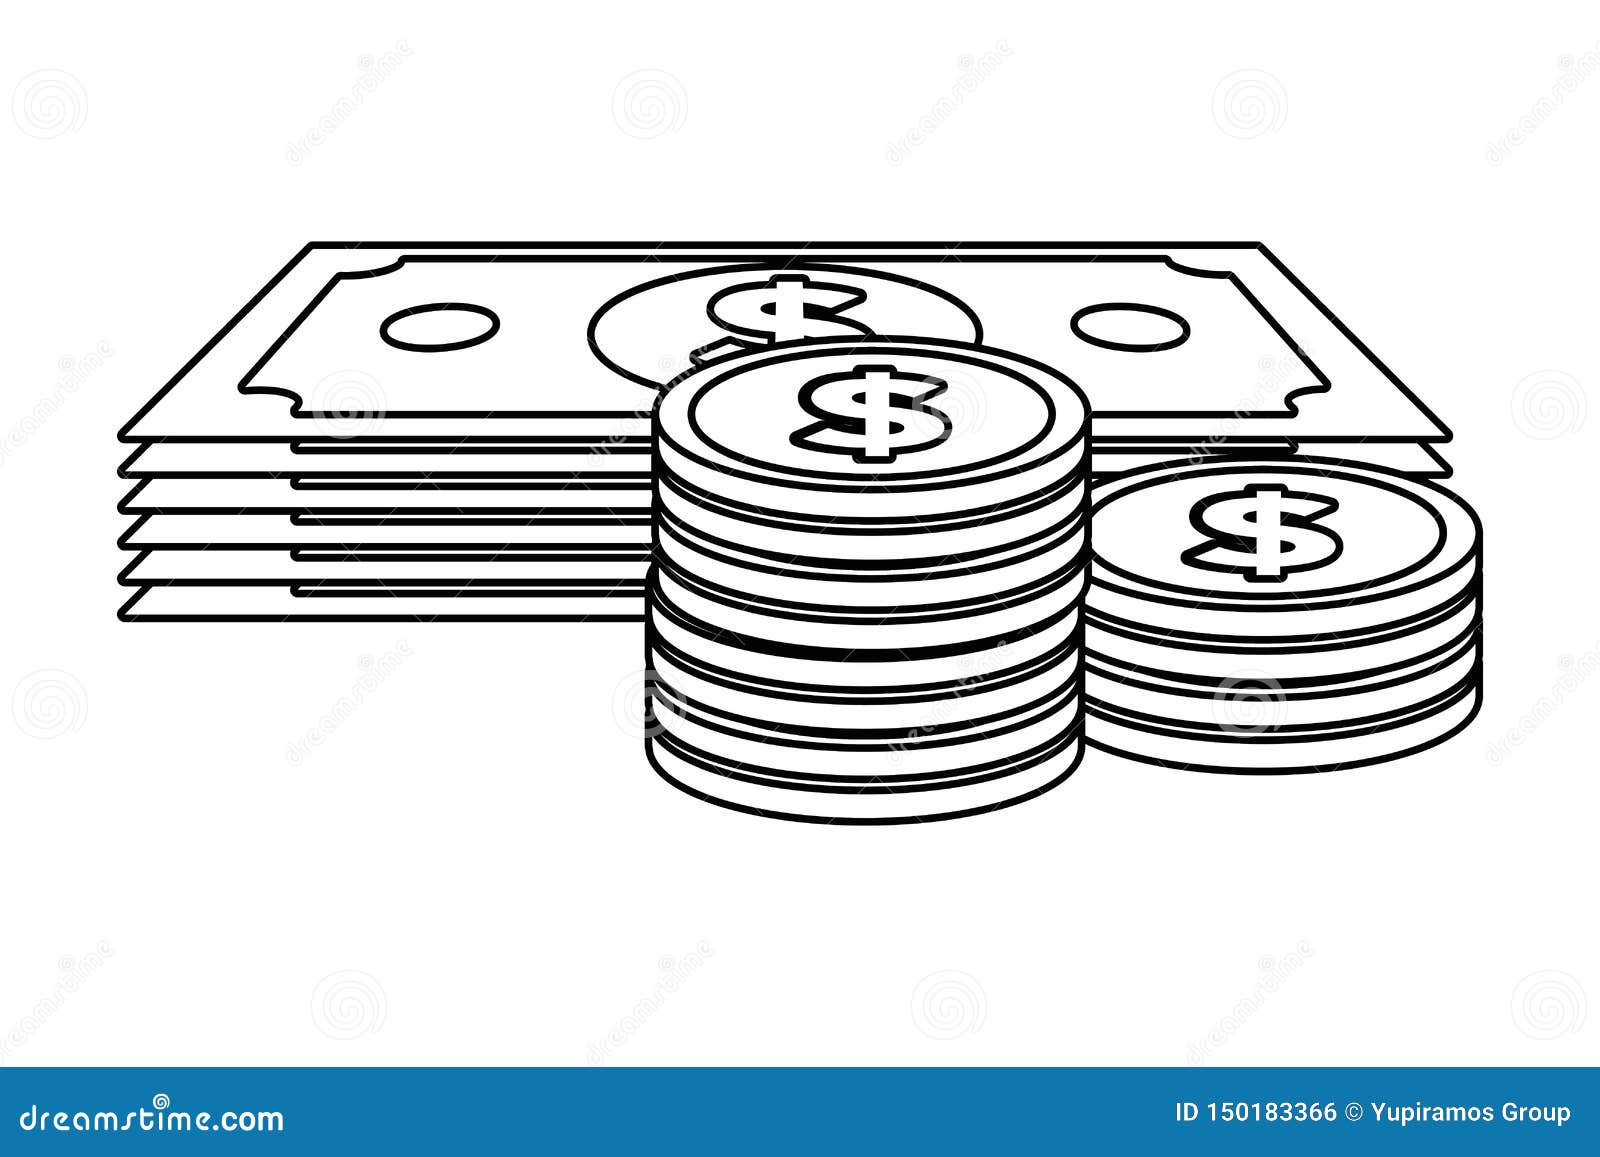 Isolated Coin and Bills, Design Vector Illustration Stock Vector ...